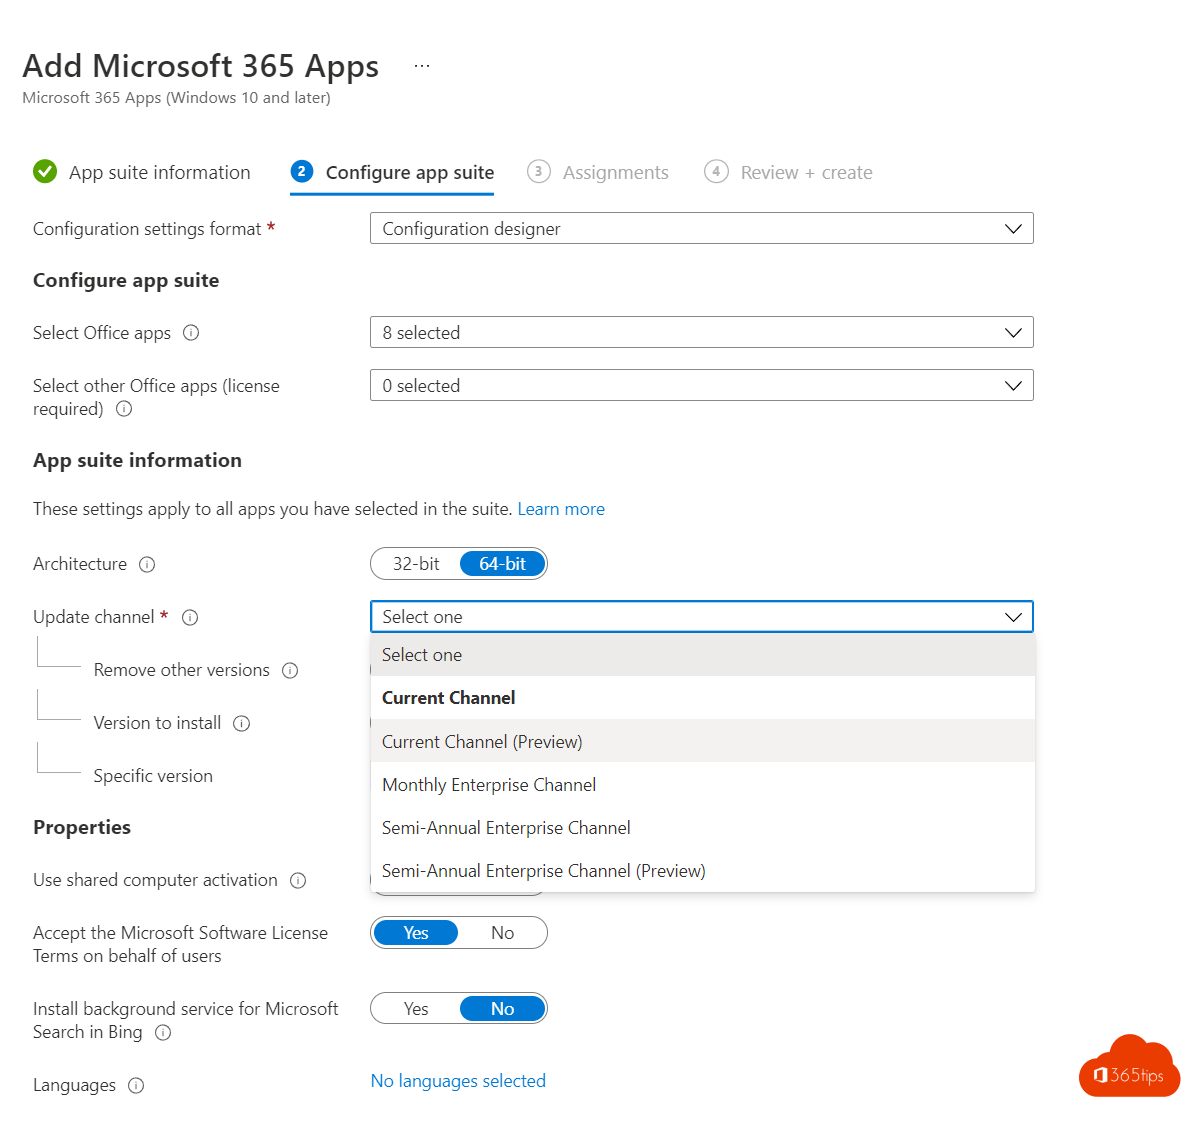 Microsoft 365 Apps deployment with Endpoint manager in 8 steps